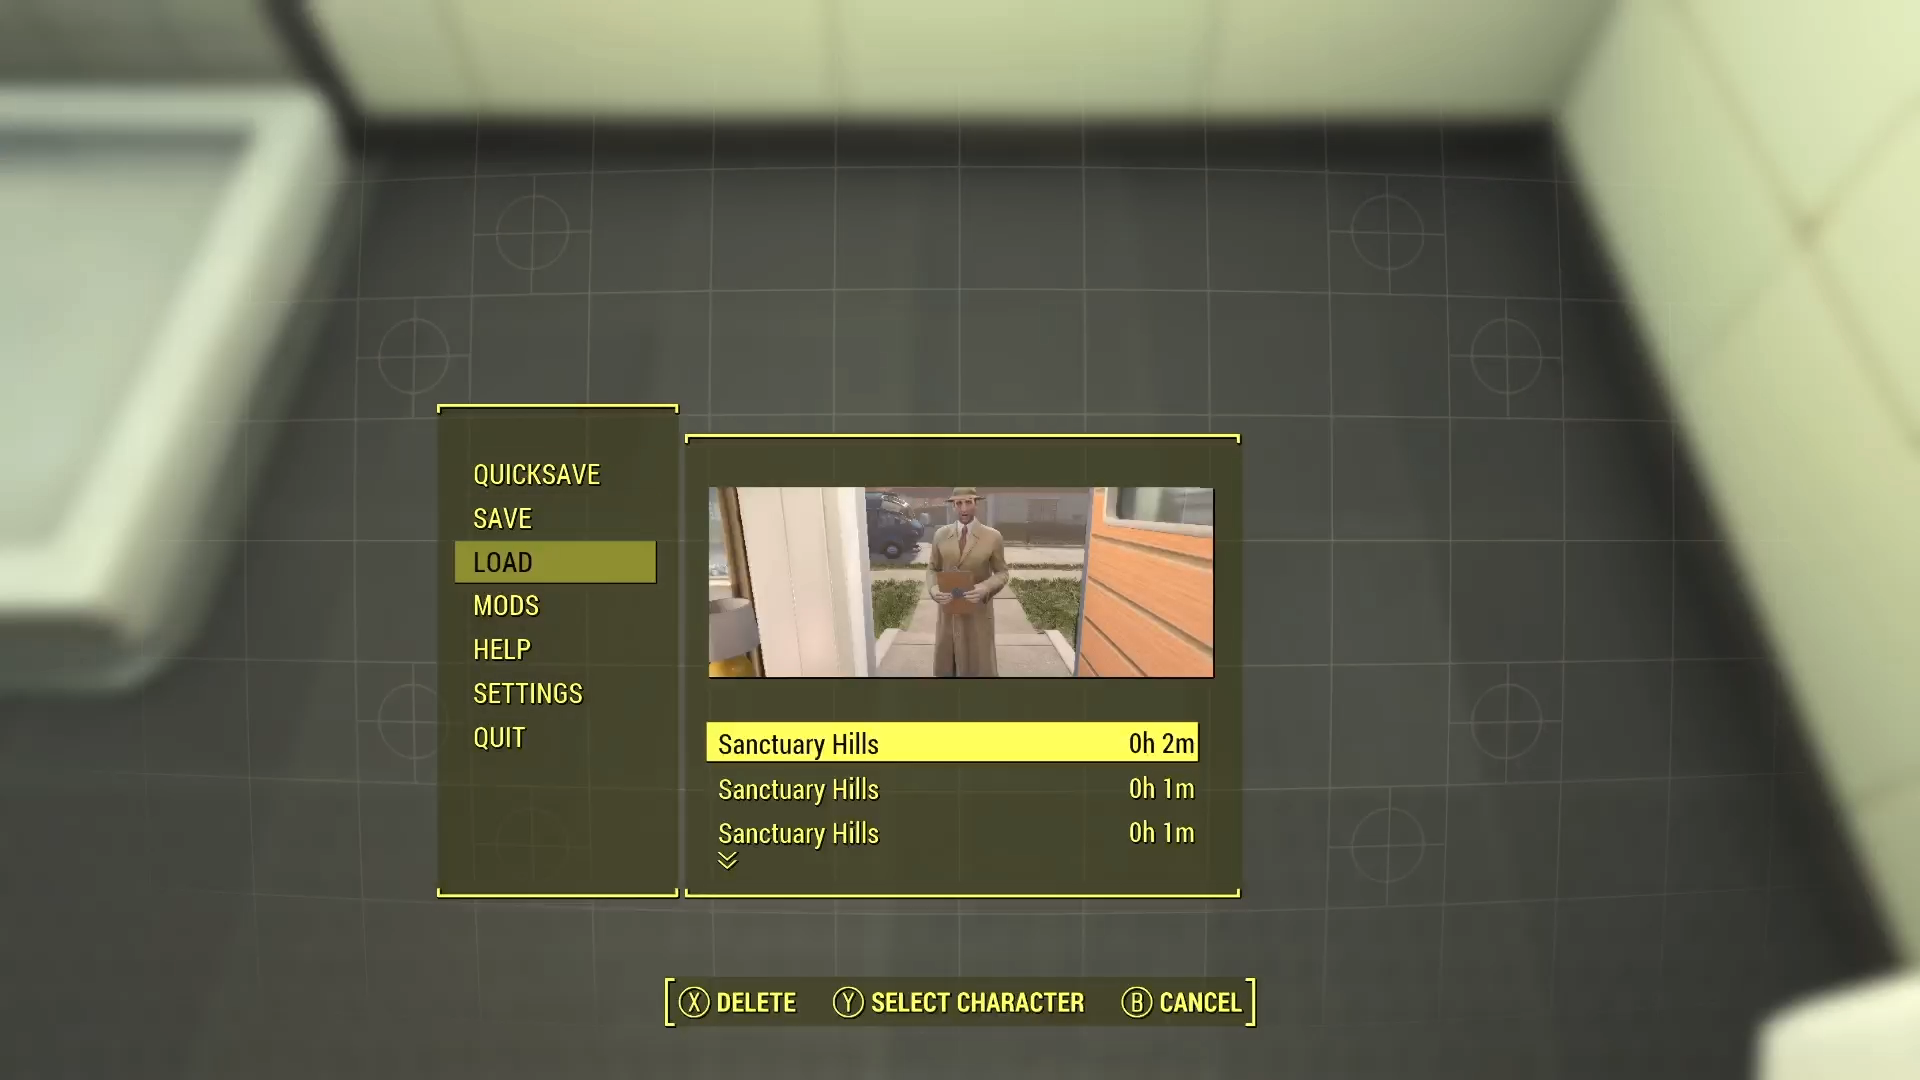 Fallout 4 screenshot including the Load menu showing three saves with the location label of Sanctuary Hills and different timestamps of when the save was created. The save file currently highlighted also shows an in-game screenshot of where the save was made.